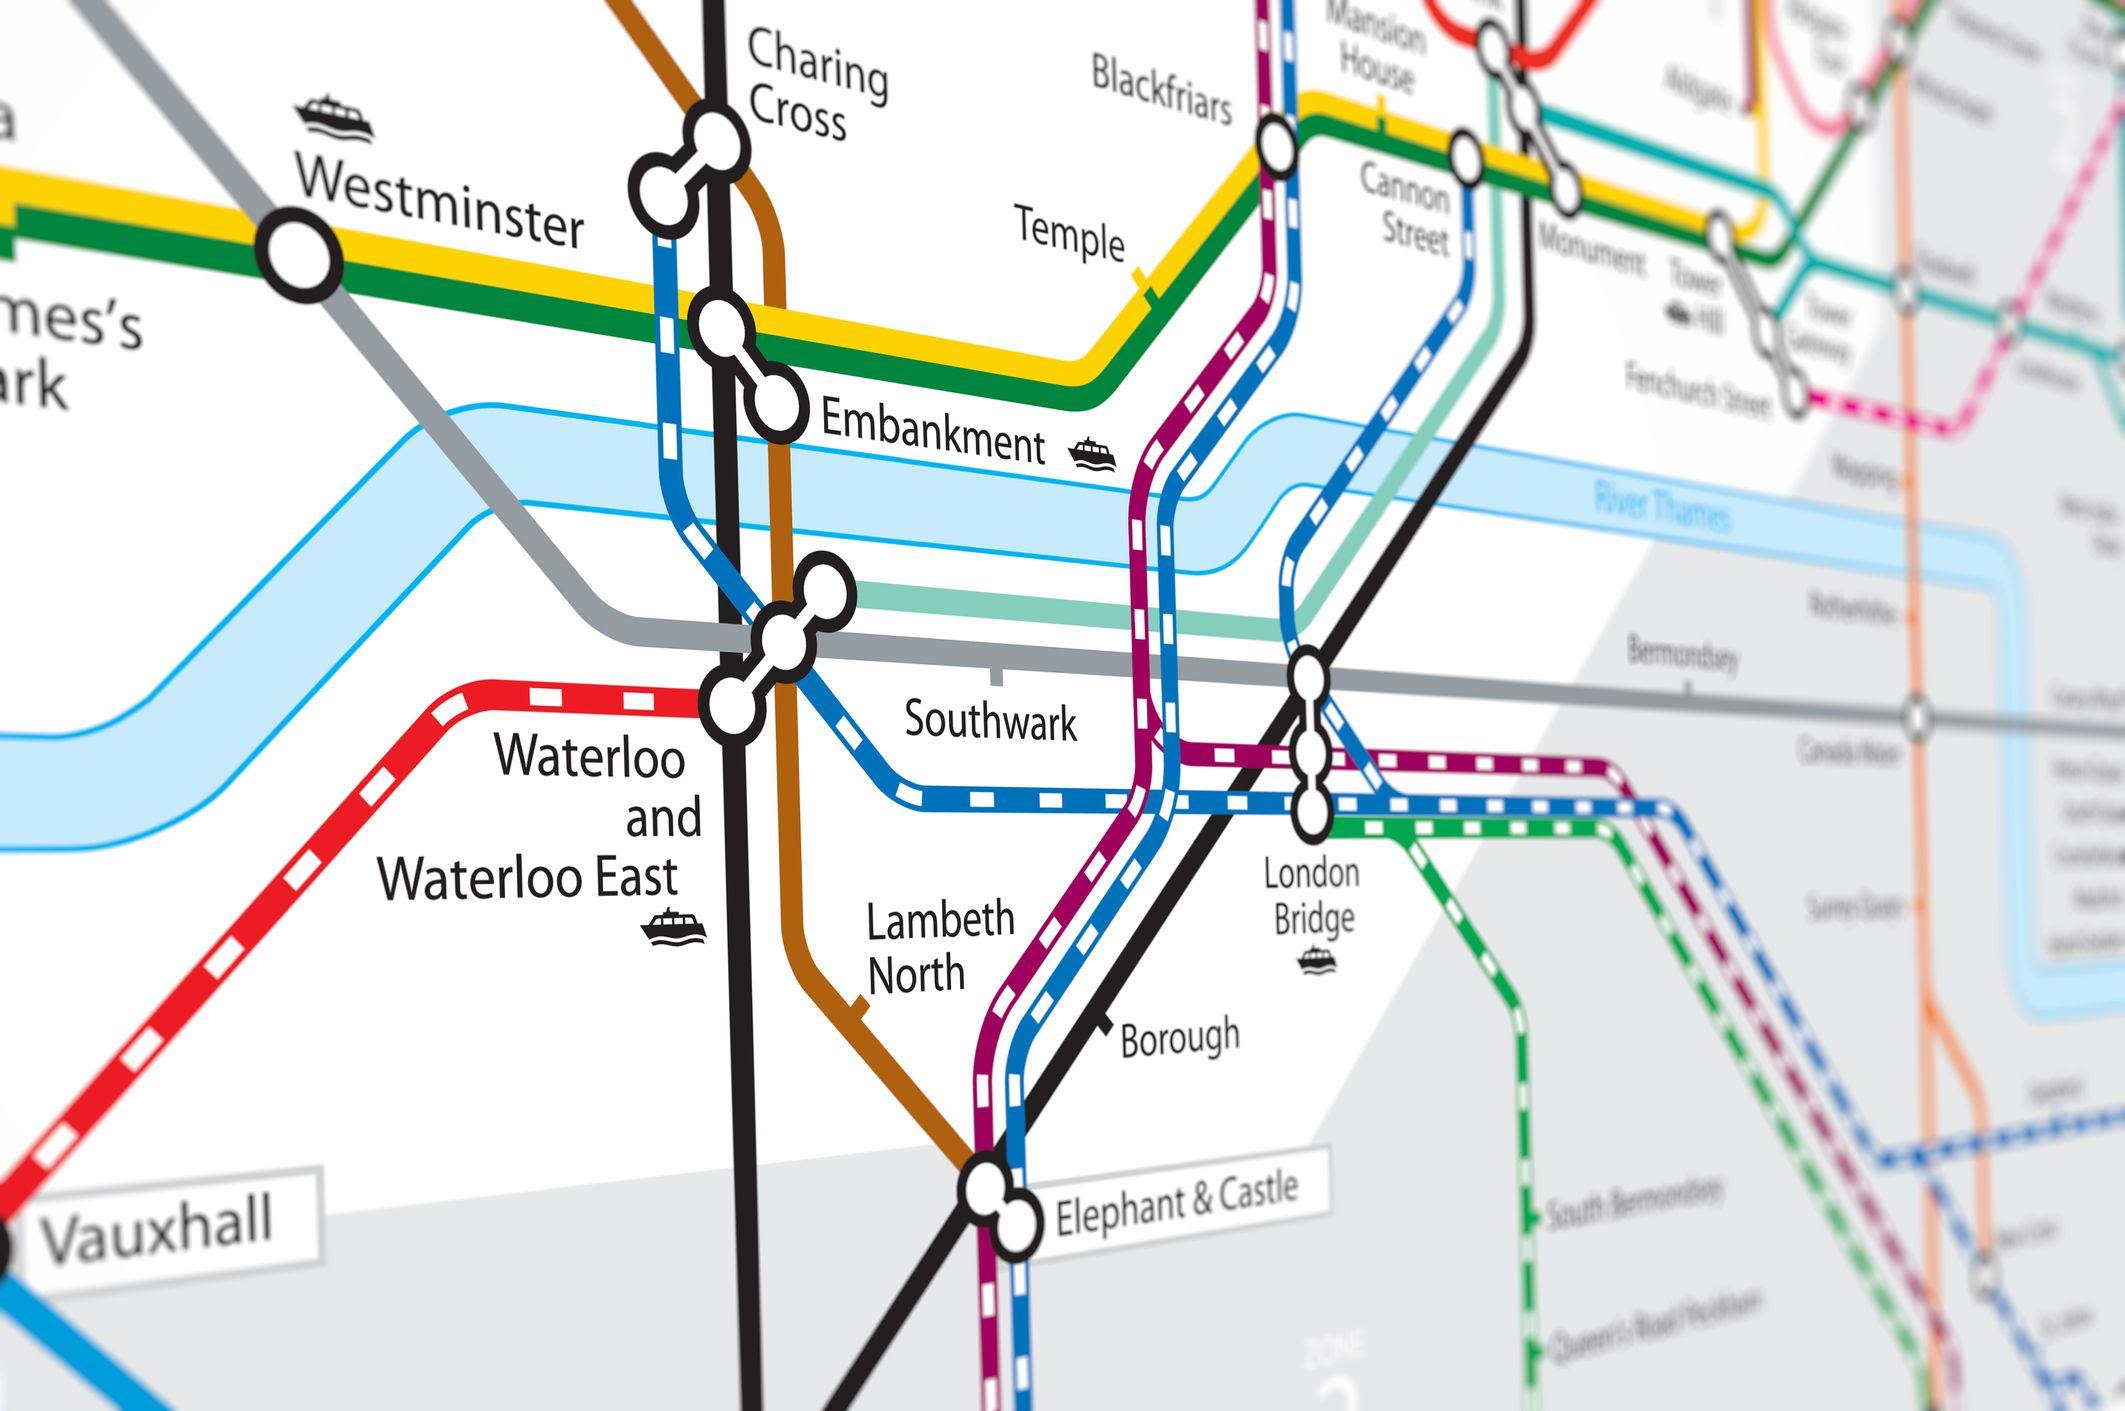 The train service that is mimicking London's Tube